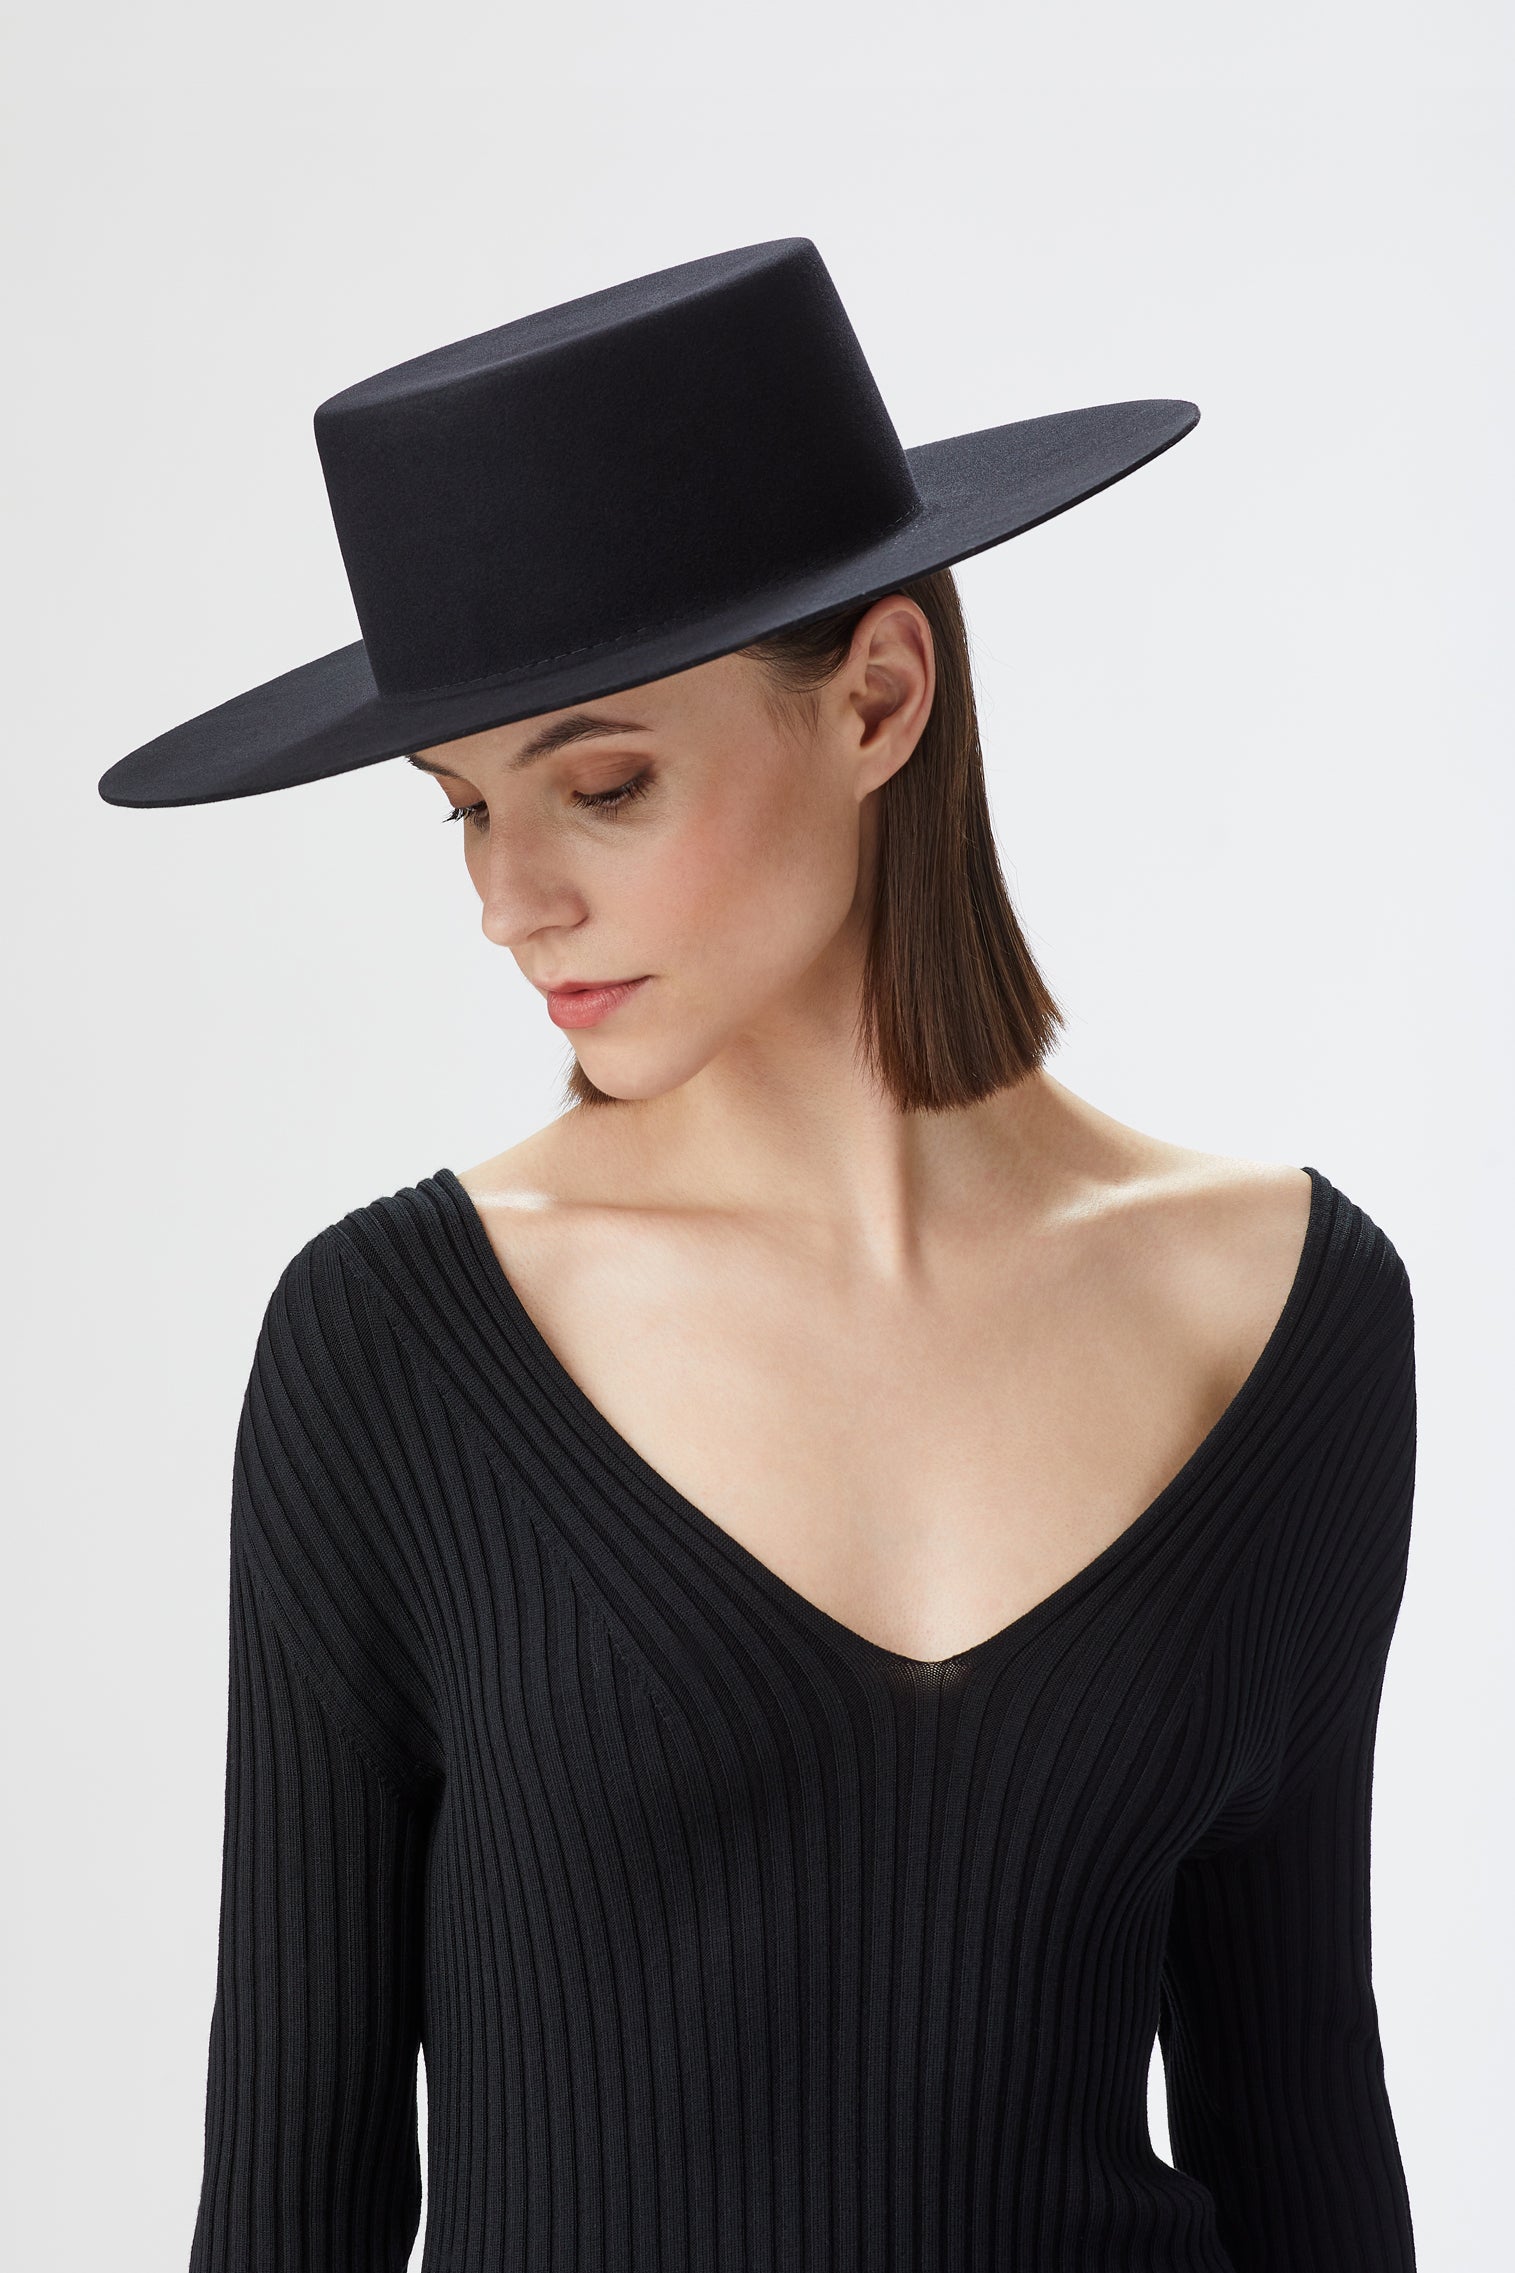 BLACK ESCORIAL WOOL SQUARE-CROWNED FEDORA HAT FROM THE LOCK & CO. HATTERS X 007 BOND COLLECTION